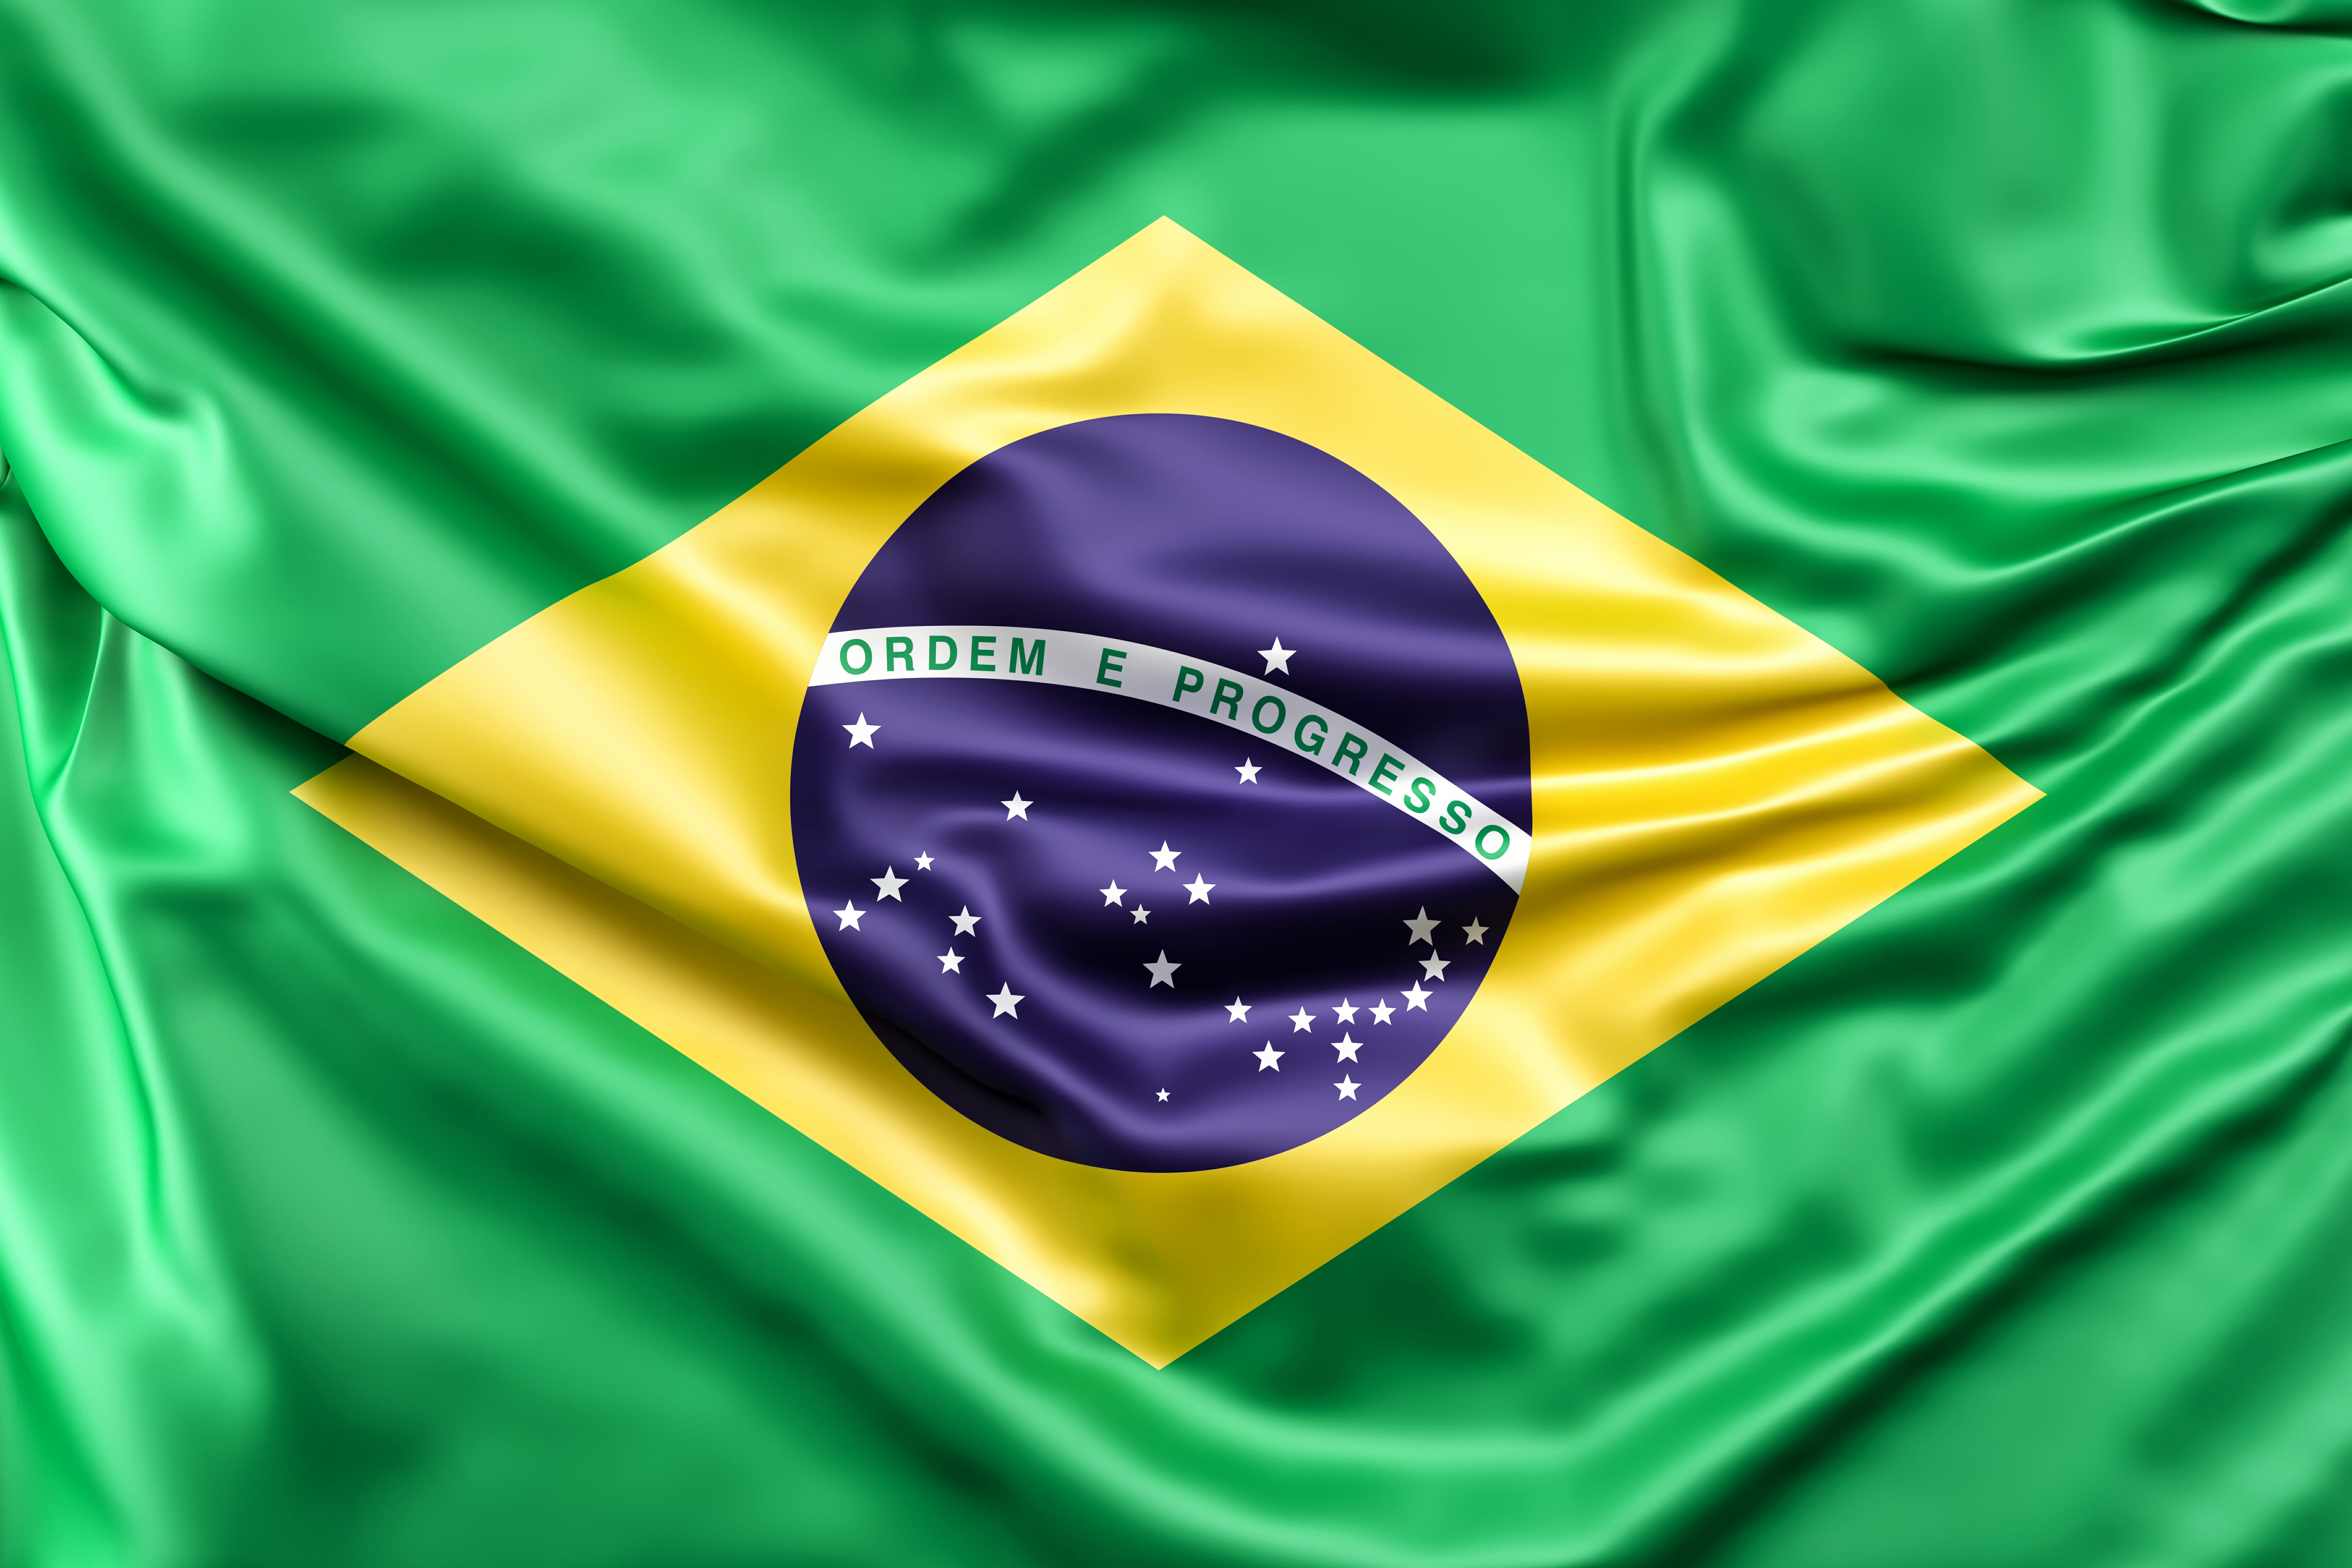 https://www.cryptoworldjournal.com/the-first-tokenized-houses-condominium-is-launched-in-brazil/#respond